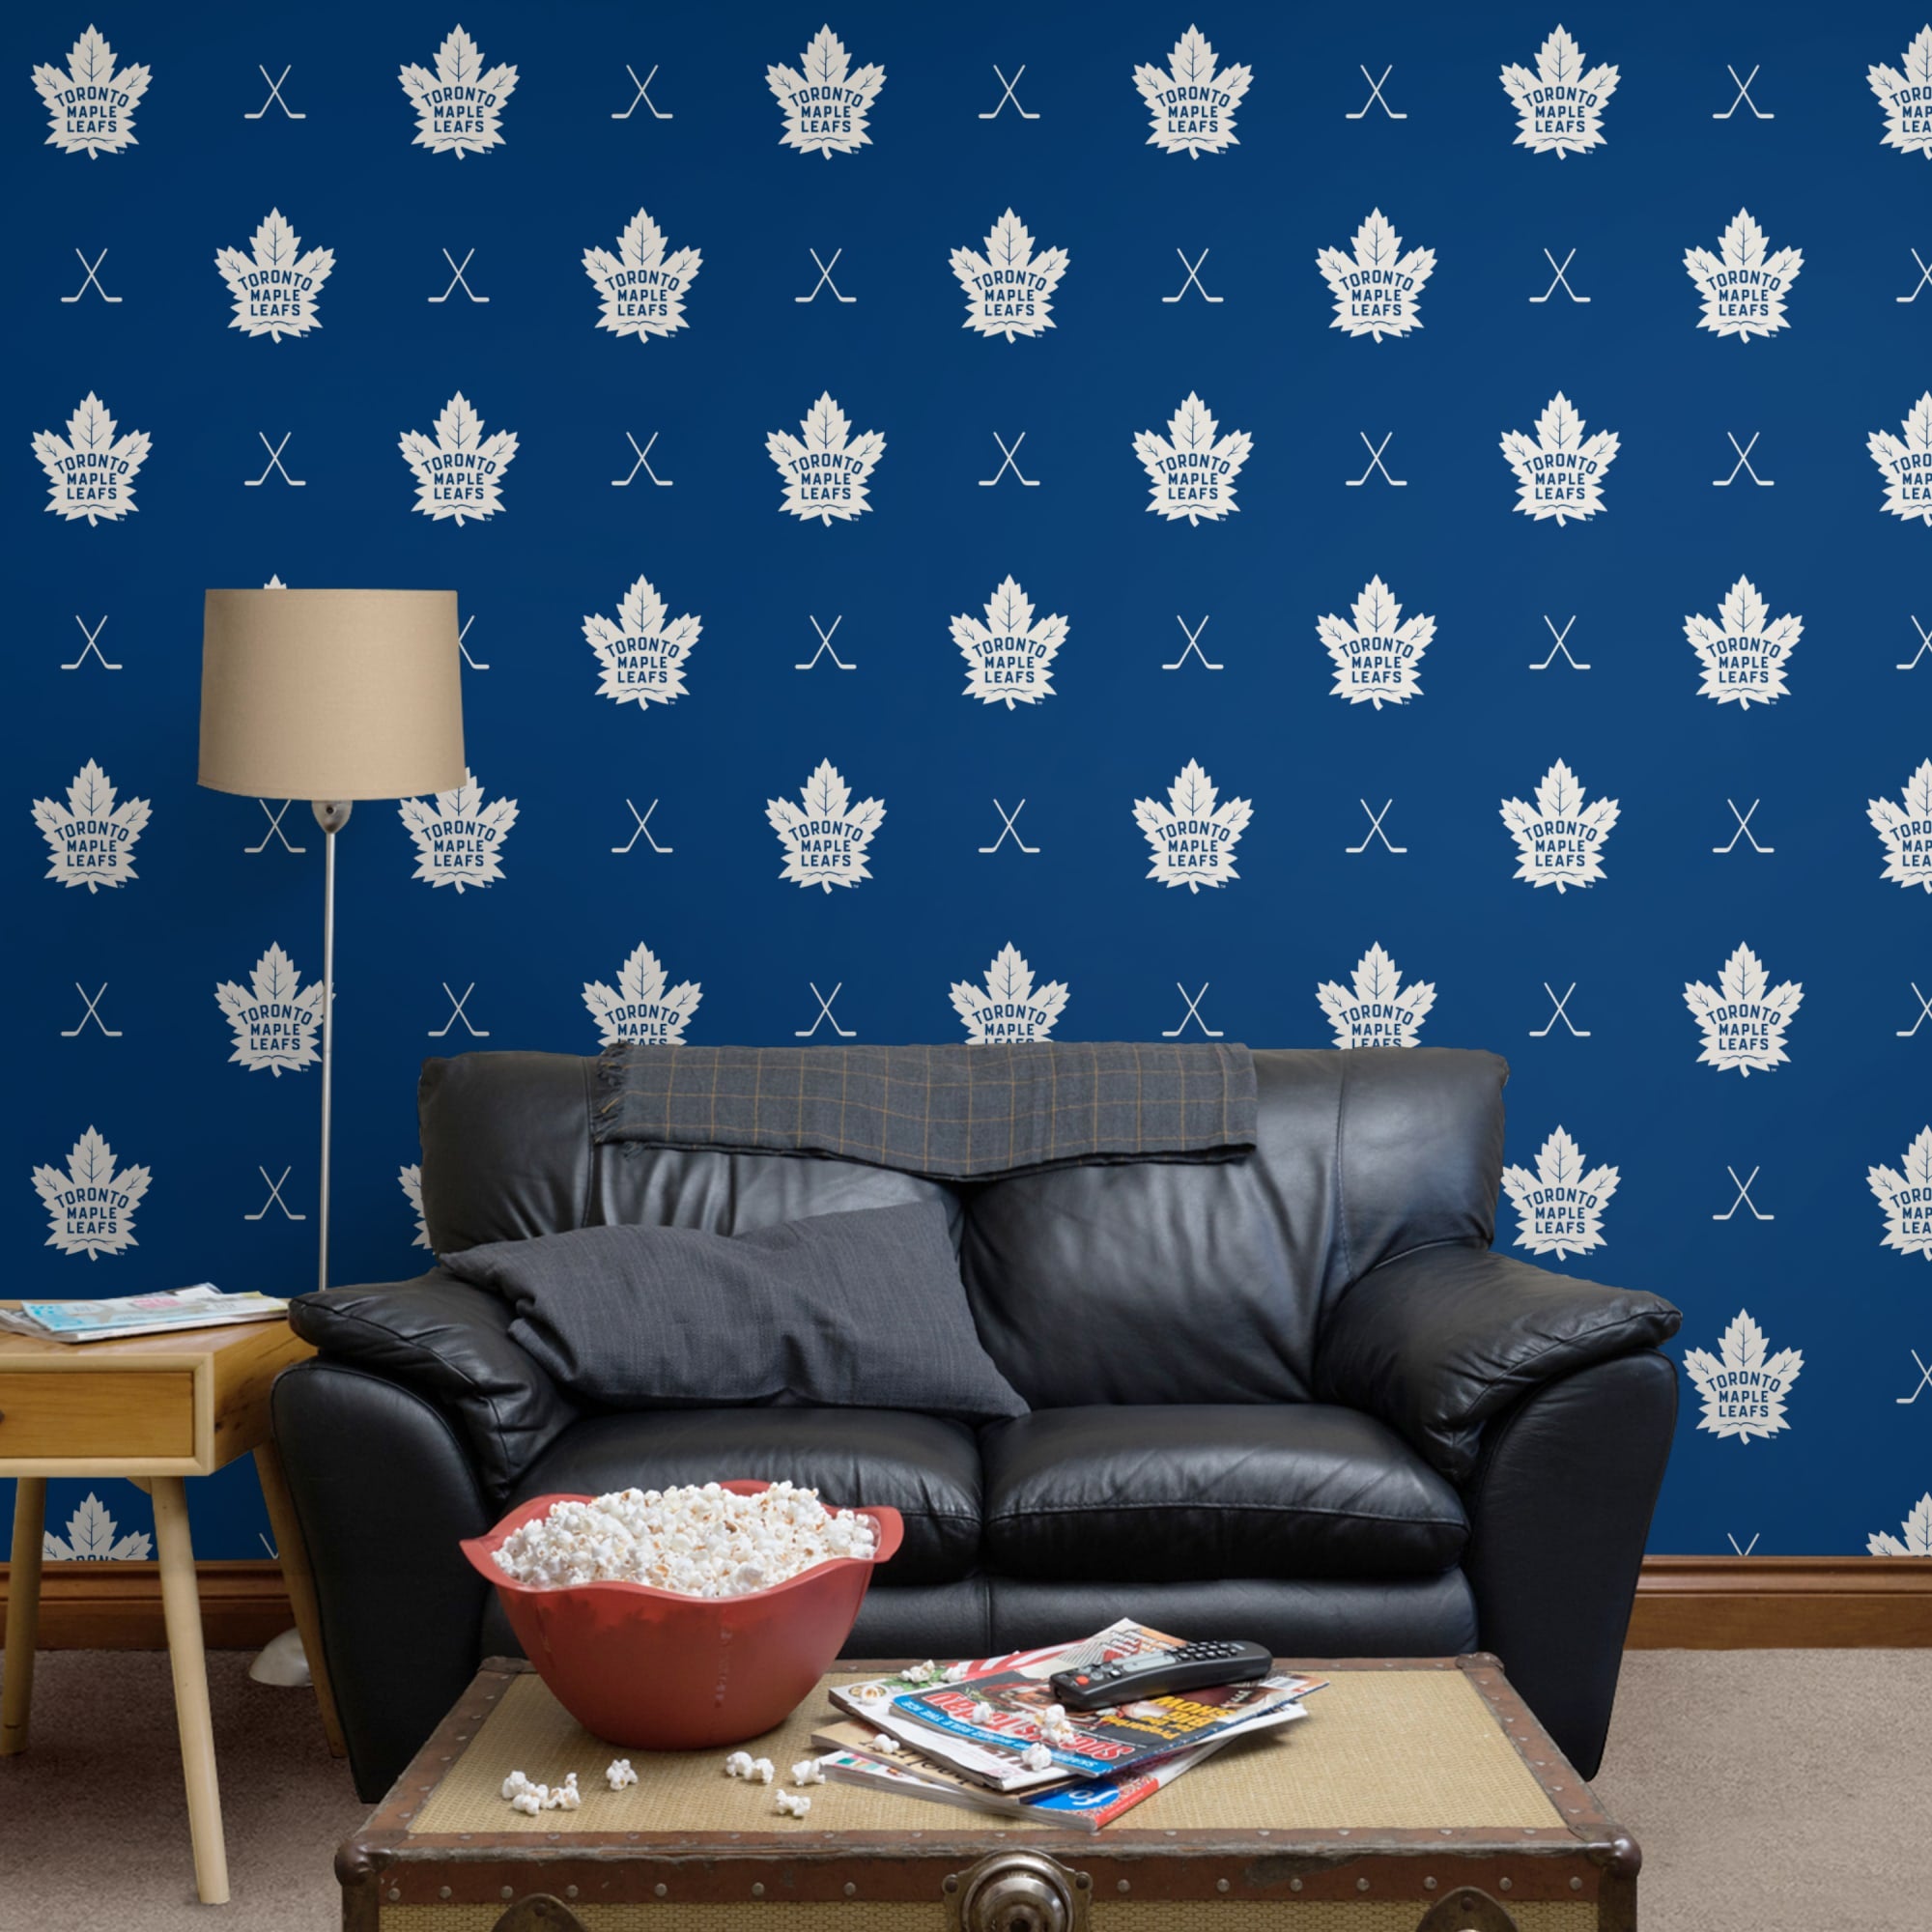 Toronto Maple Leafs: Sticks Pattern - Officially Licensed NHL Removable Wallpaper 12" x 12" Sample by Fathead | 100% Vinyl